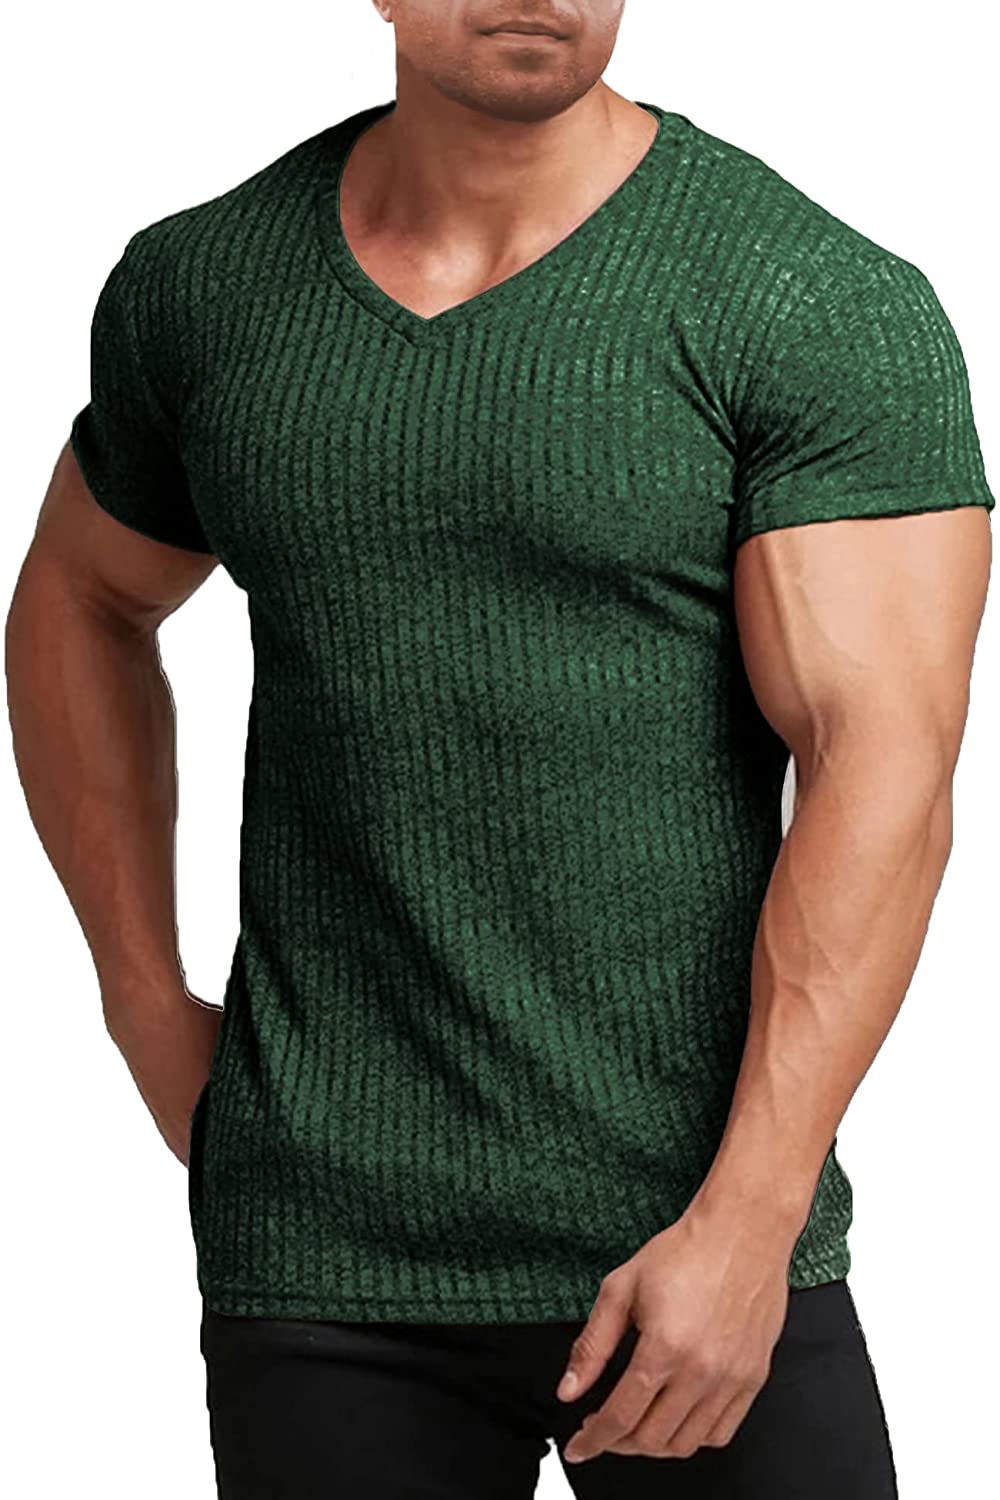 COOFANDY Men's Muscle T Shirts Stretch Short Sleeve V Neck Bodybuilding Workout Tee Shirts 